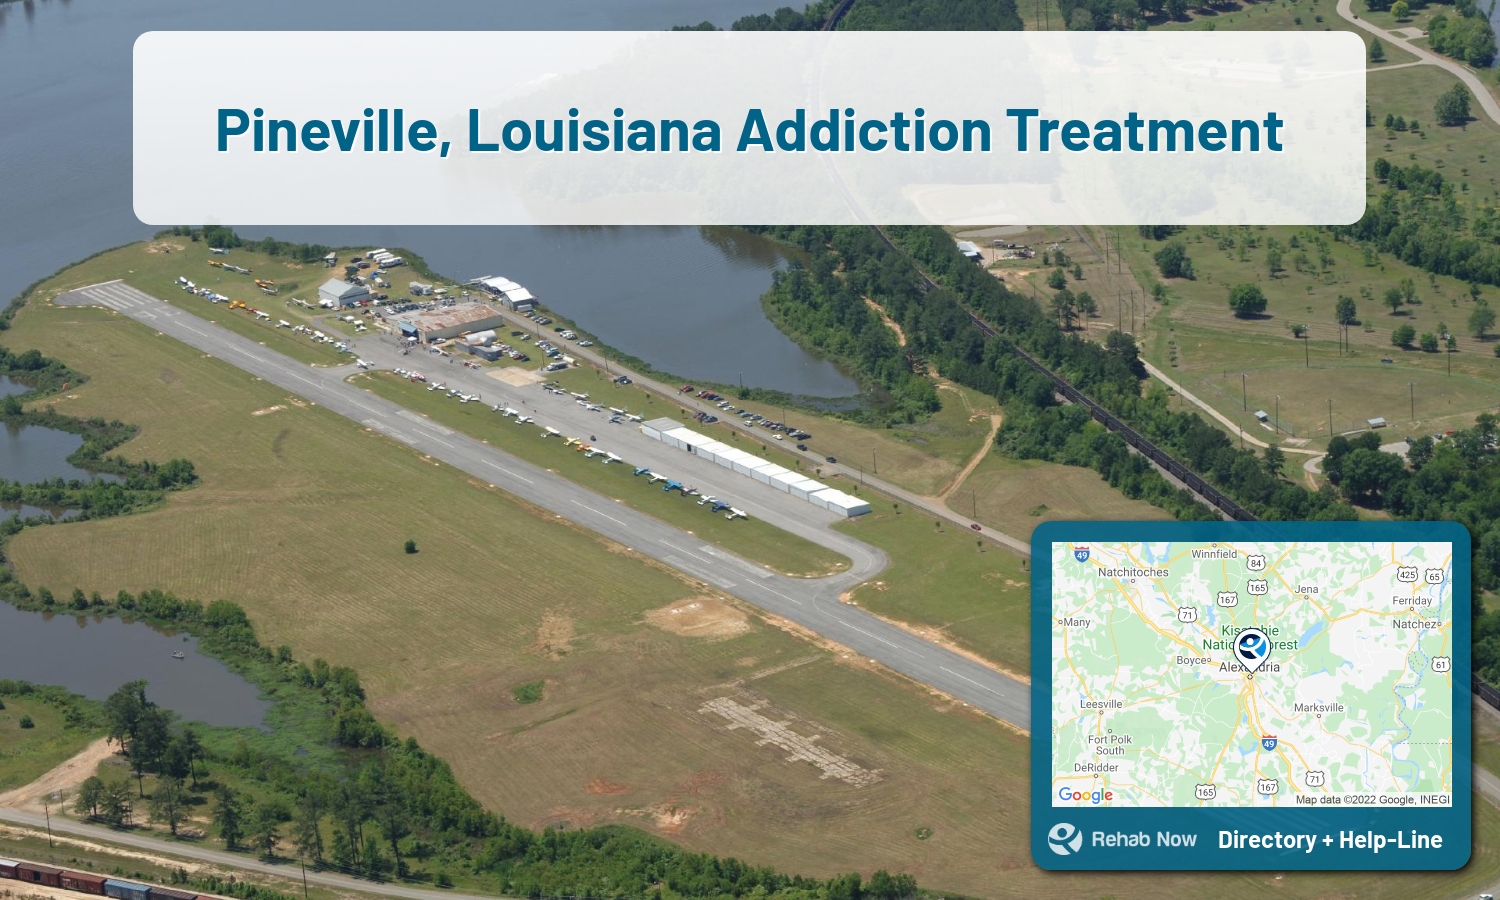 Pineville, LA Treatment Centers. Find drug rehab in Pineville, Louisiana, or detox and treatment programs. Get the right help now!